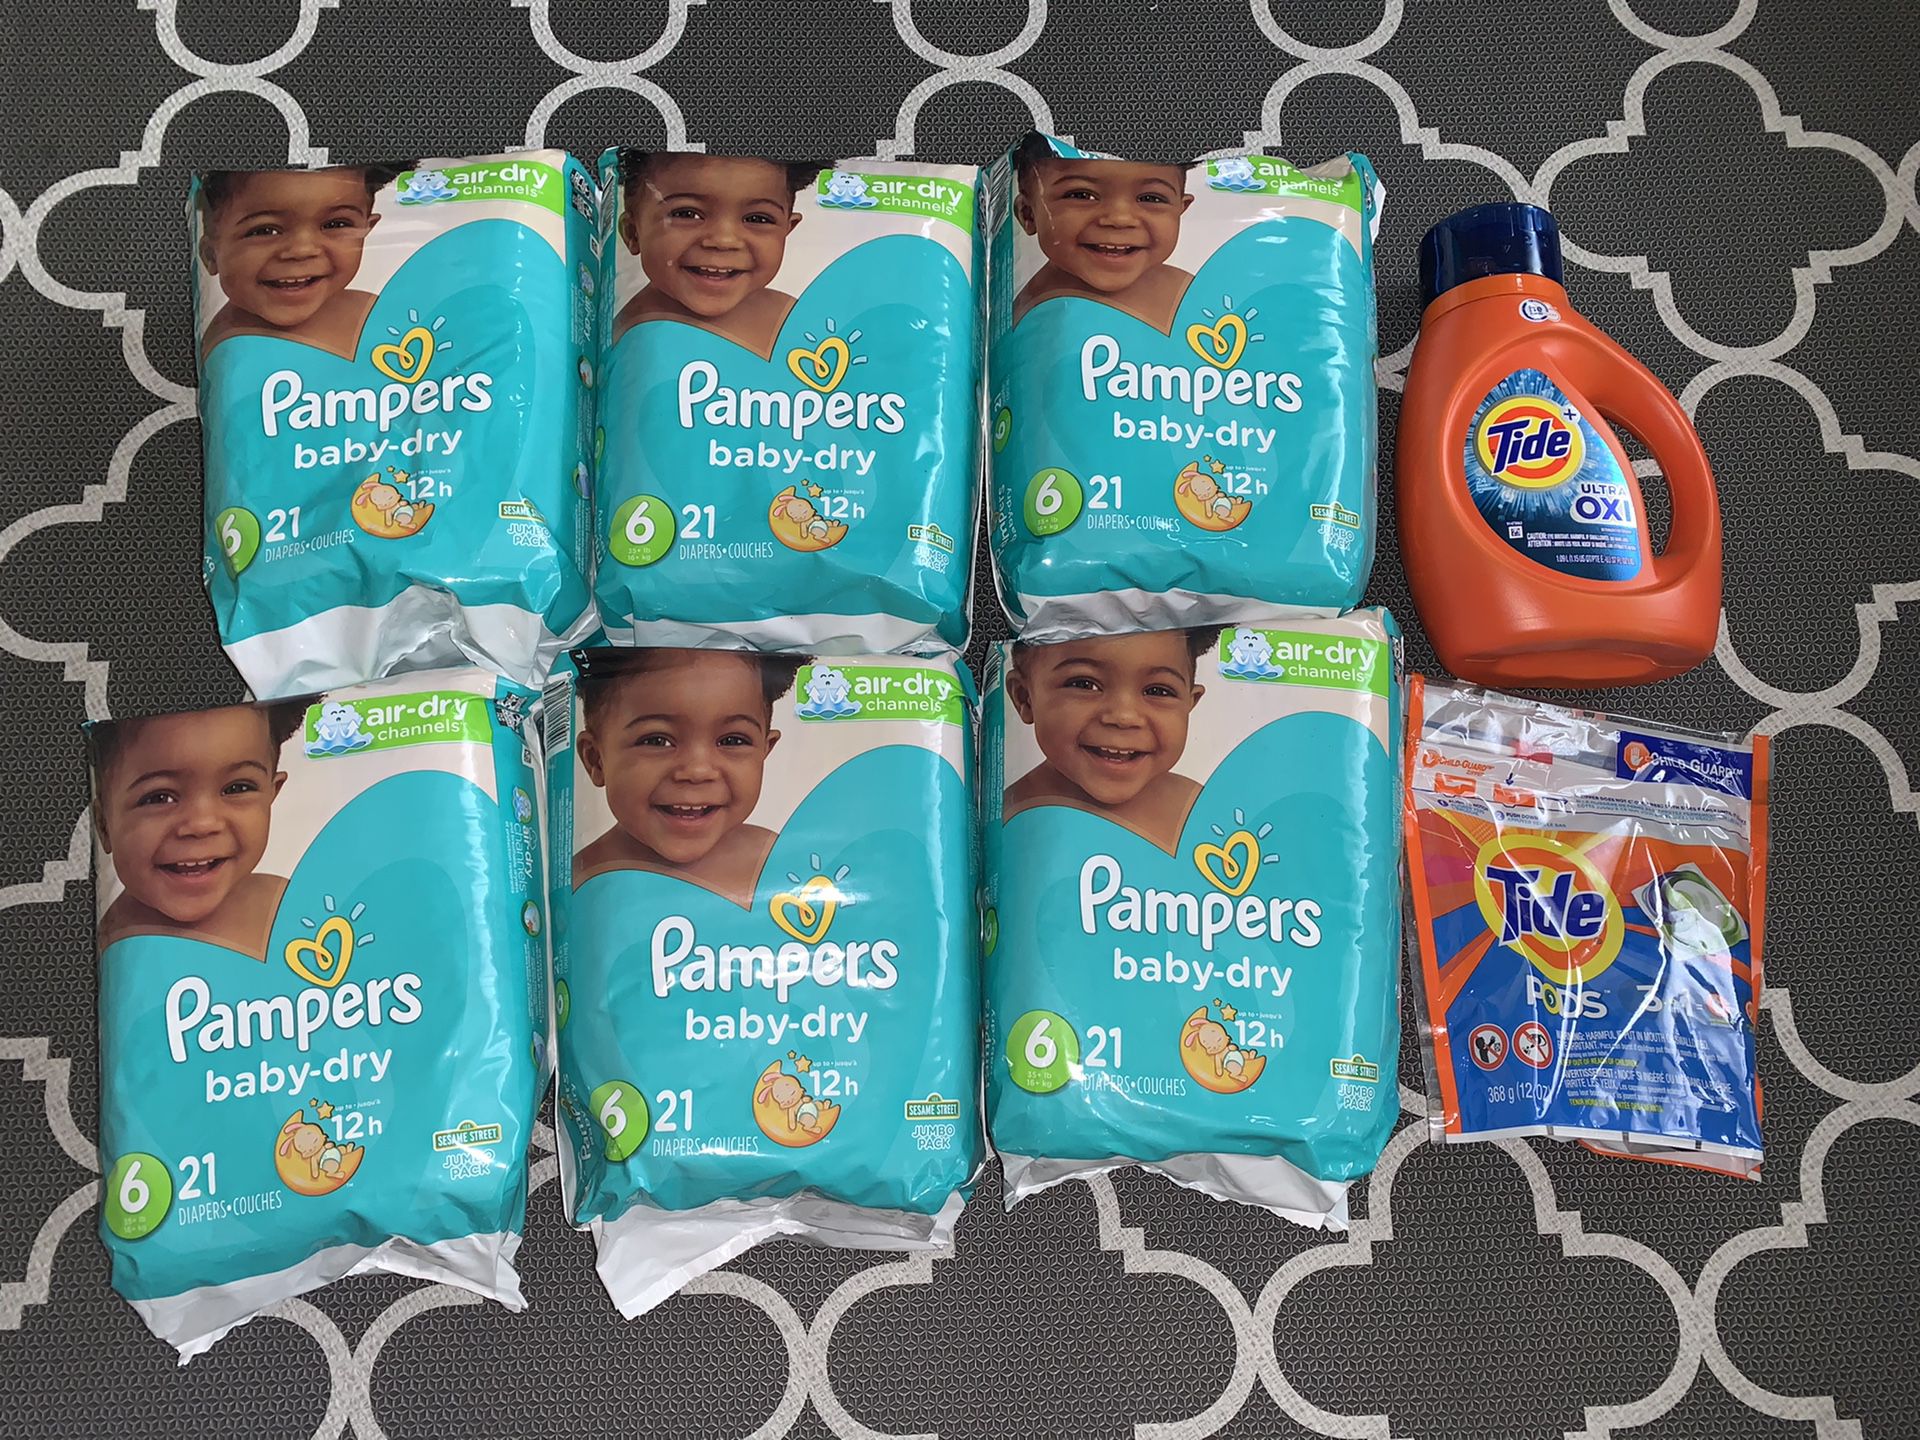 Brands New packs (6) of Pampers Baby Dry diapers, Tide pods and Tide detergent